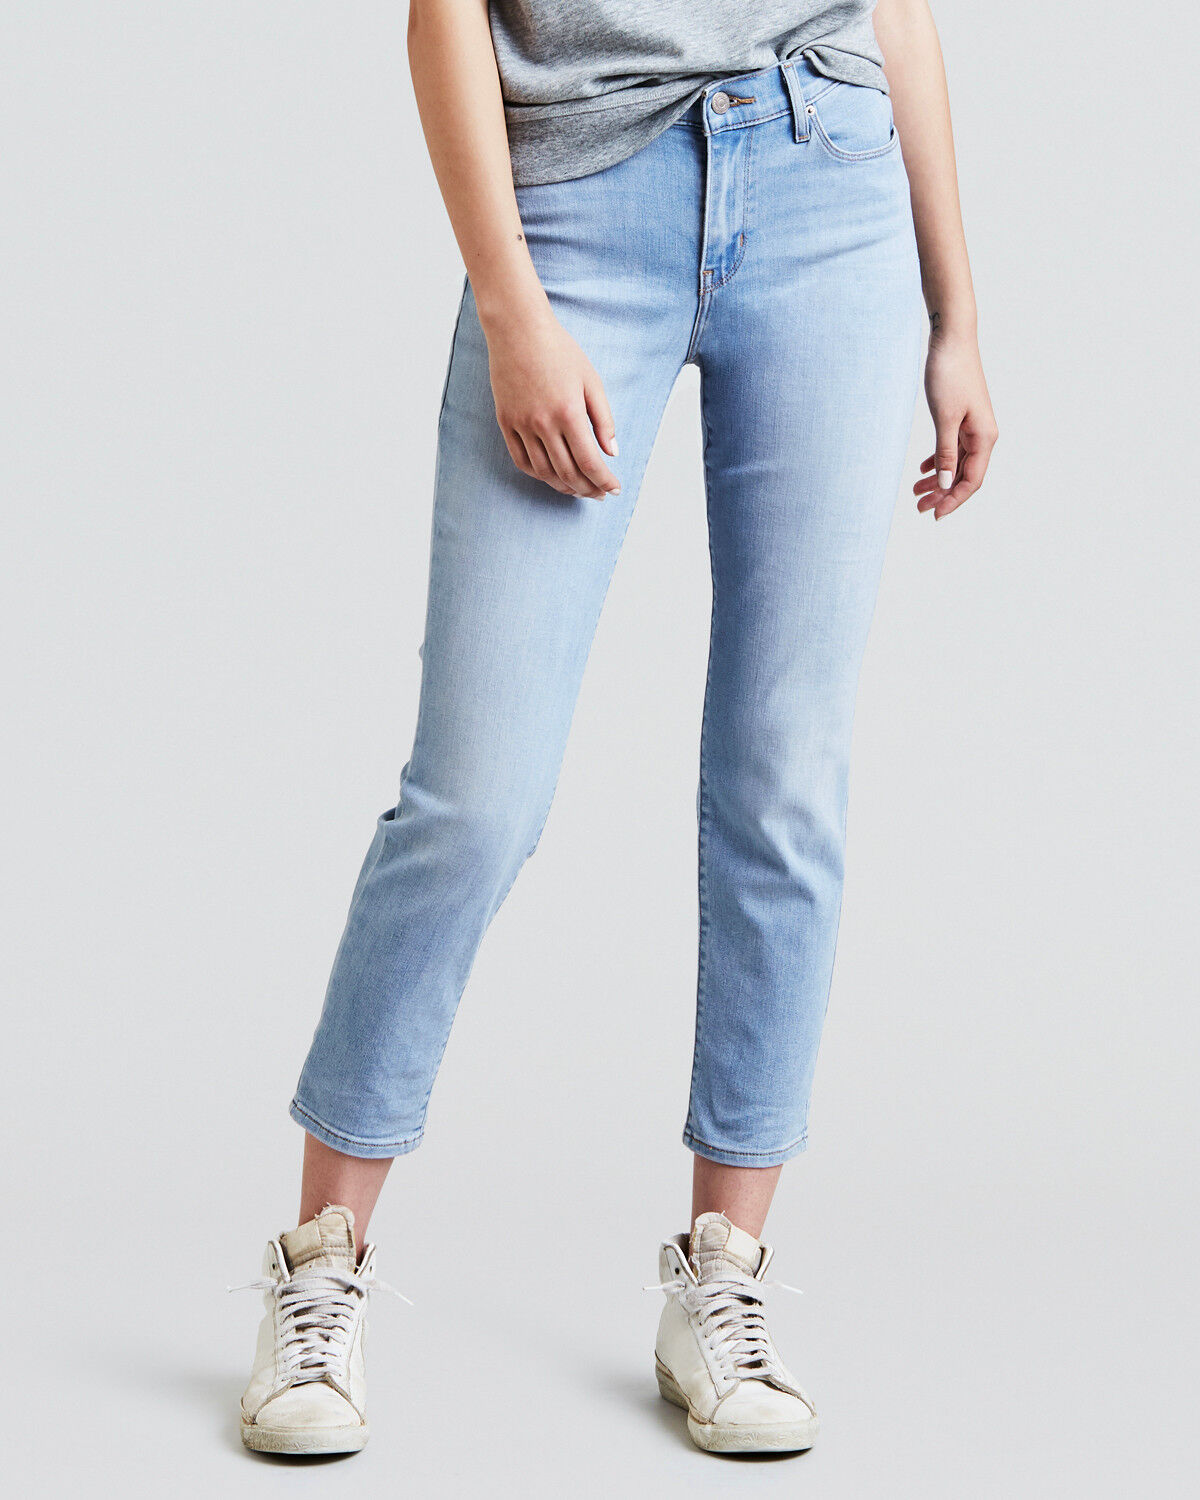 Levi's Women's Classic Crop Hotsell, 60% OFF | www.ilpungolo.org